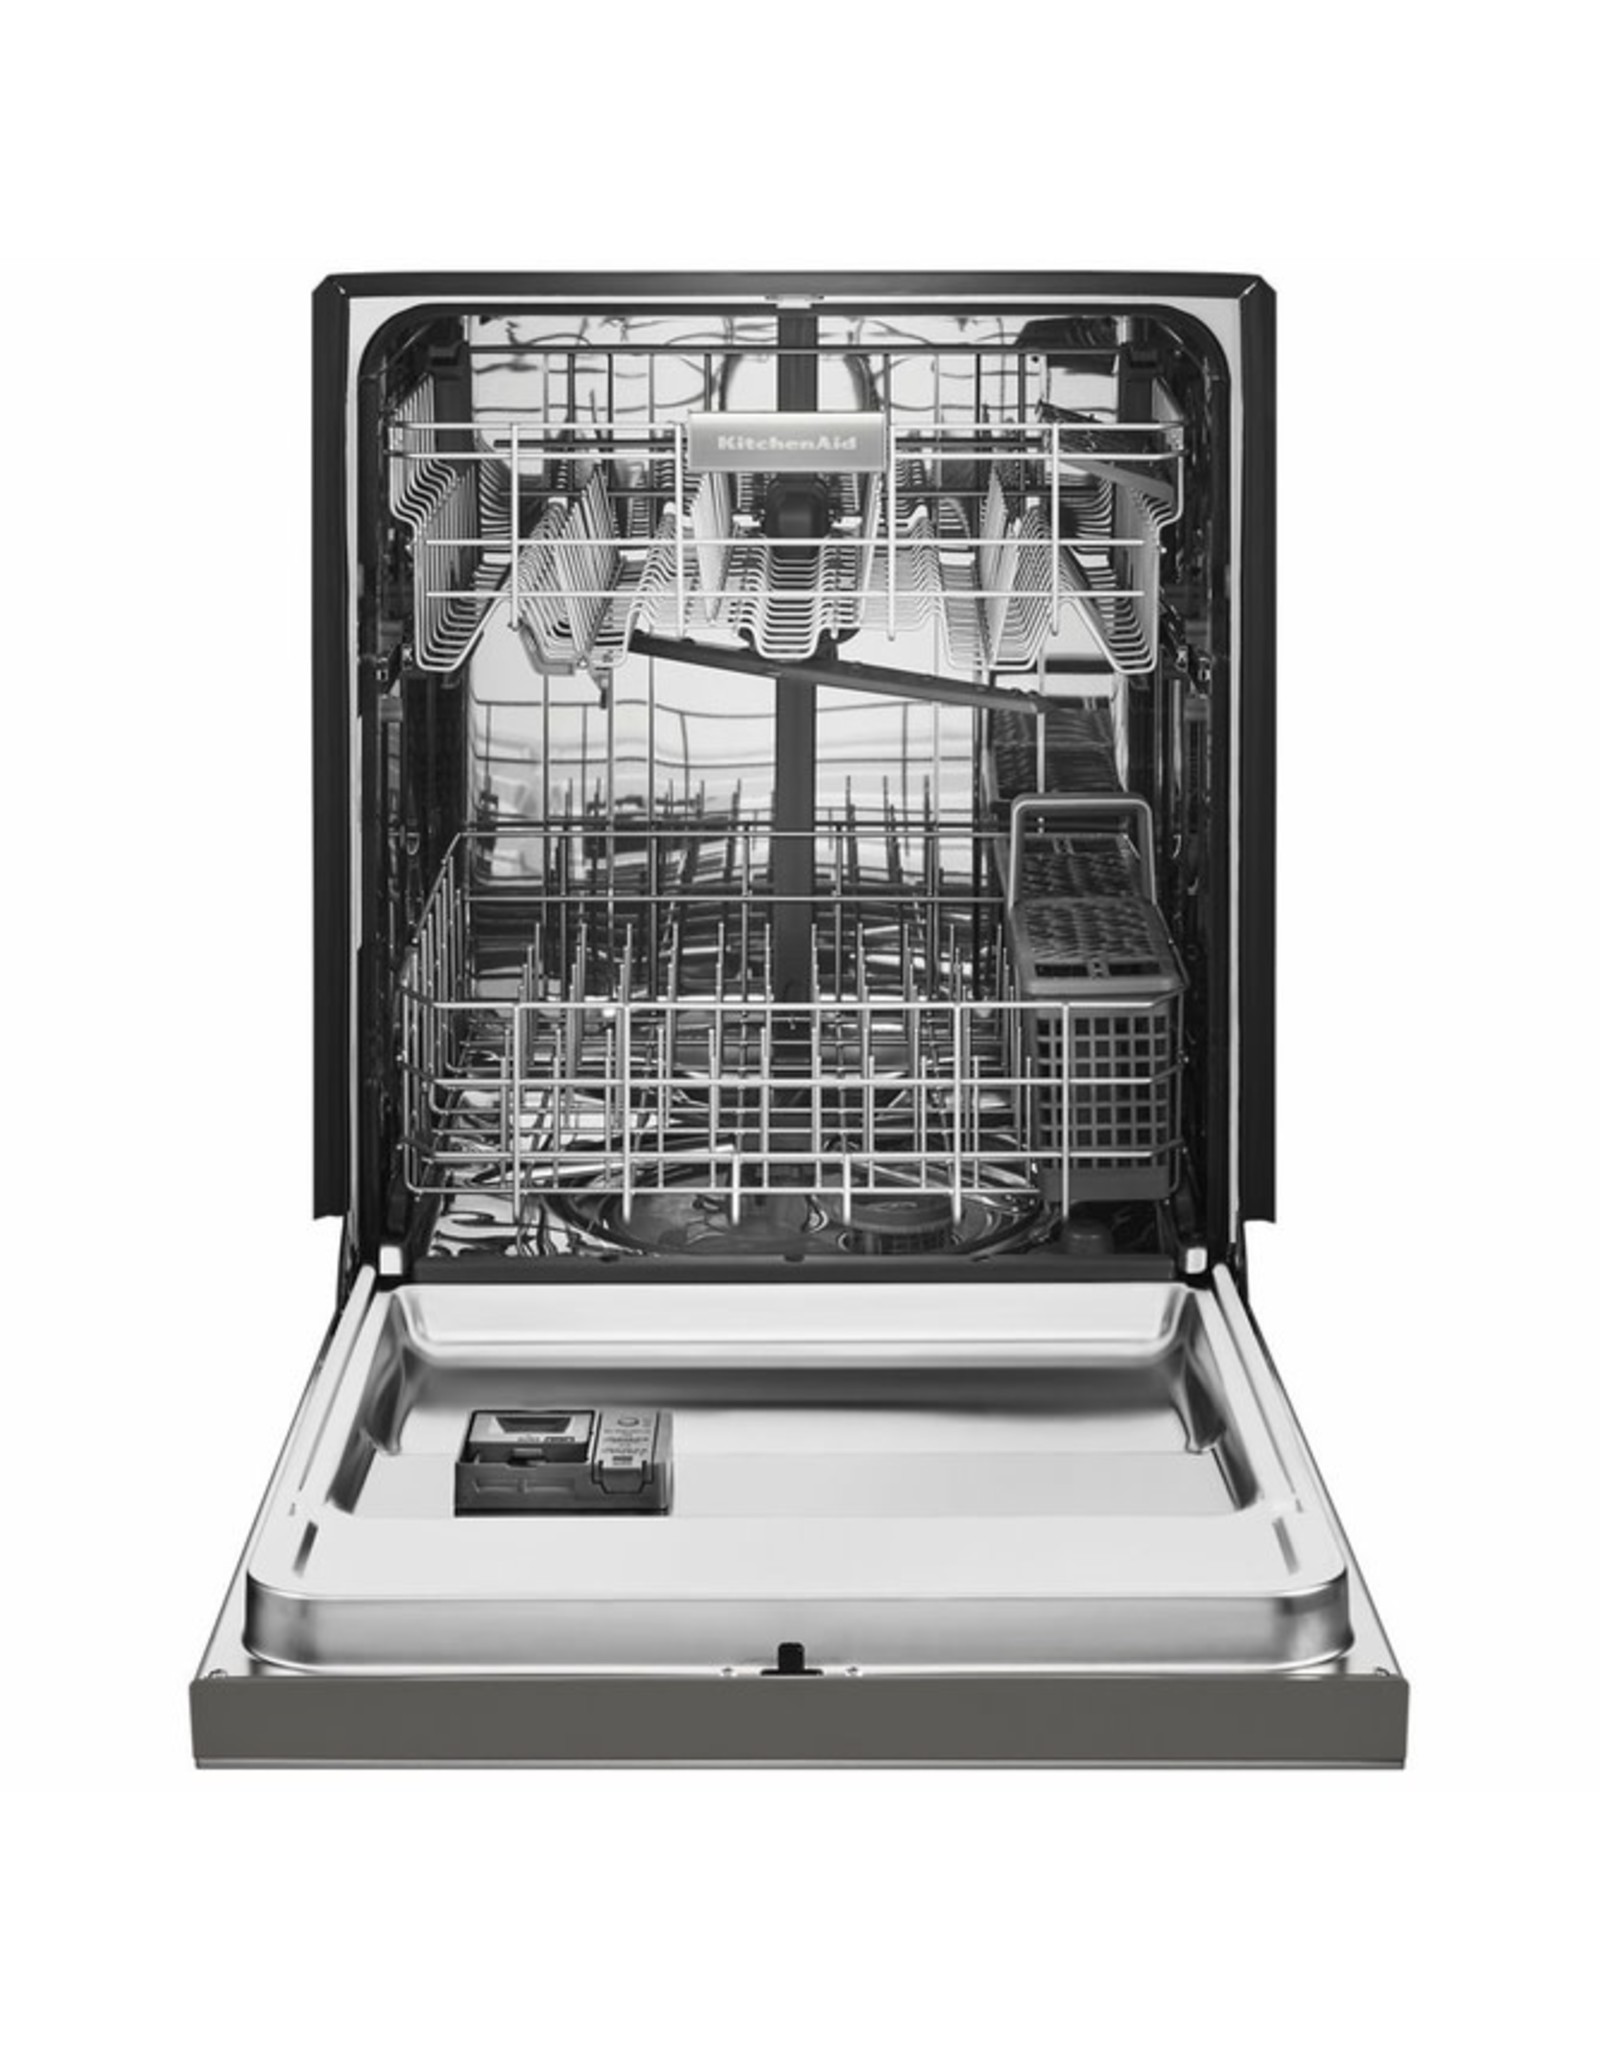 KDFE104HPS KAD Built-in - Dishwasher - 6 CYCLES, 5 OPTIONS, CONSOLE, 46 DBA, SA